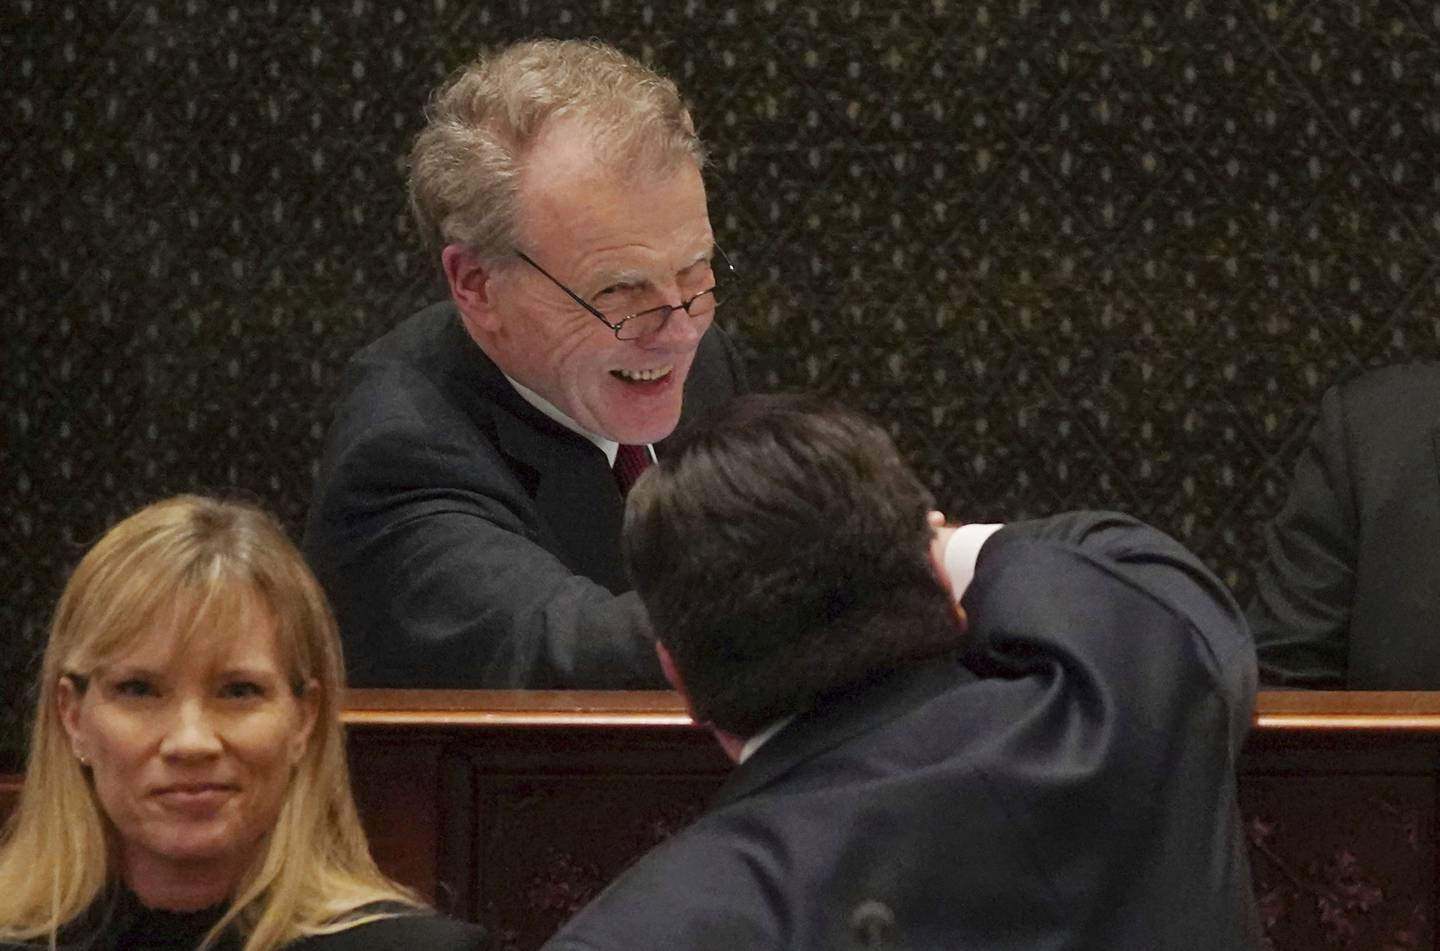 House Speaker Michael Madigan faces and congratulates Gov. J.B. Pritzker after his first budget address at the Illinois State Capitol in Springfield on Feb. 20, 2019. 